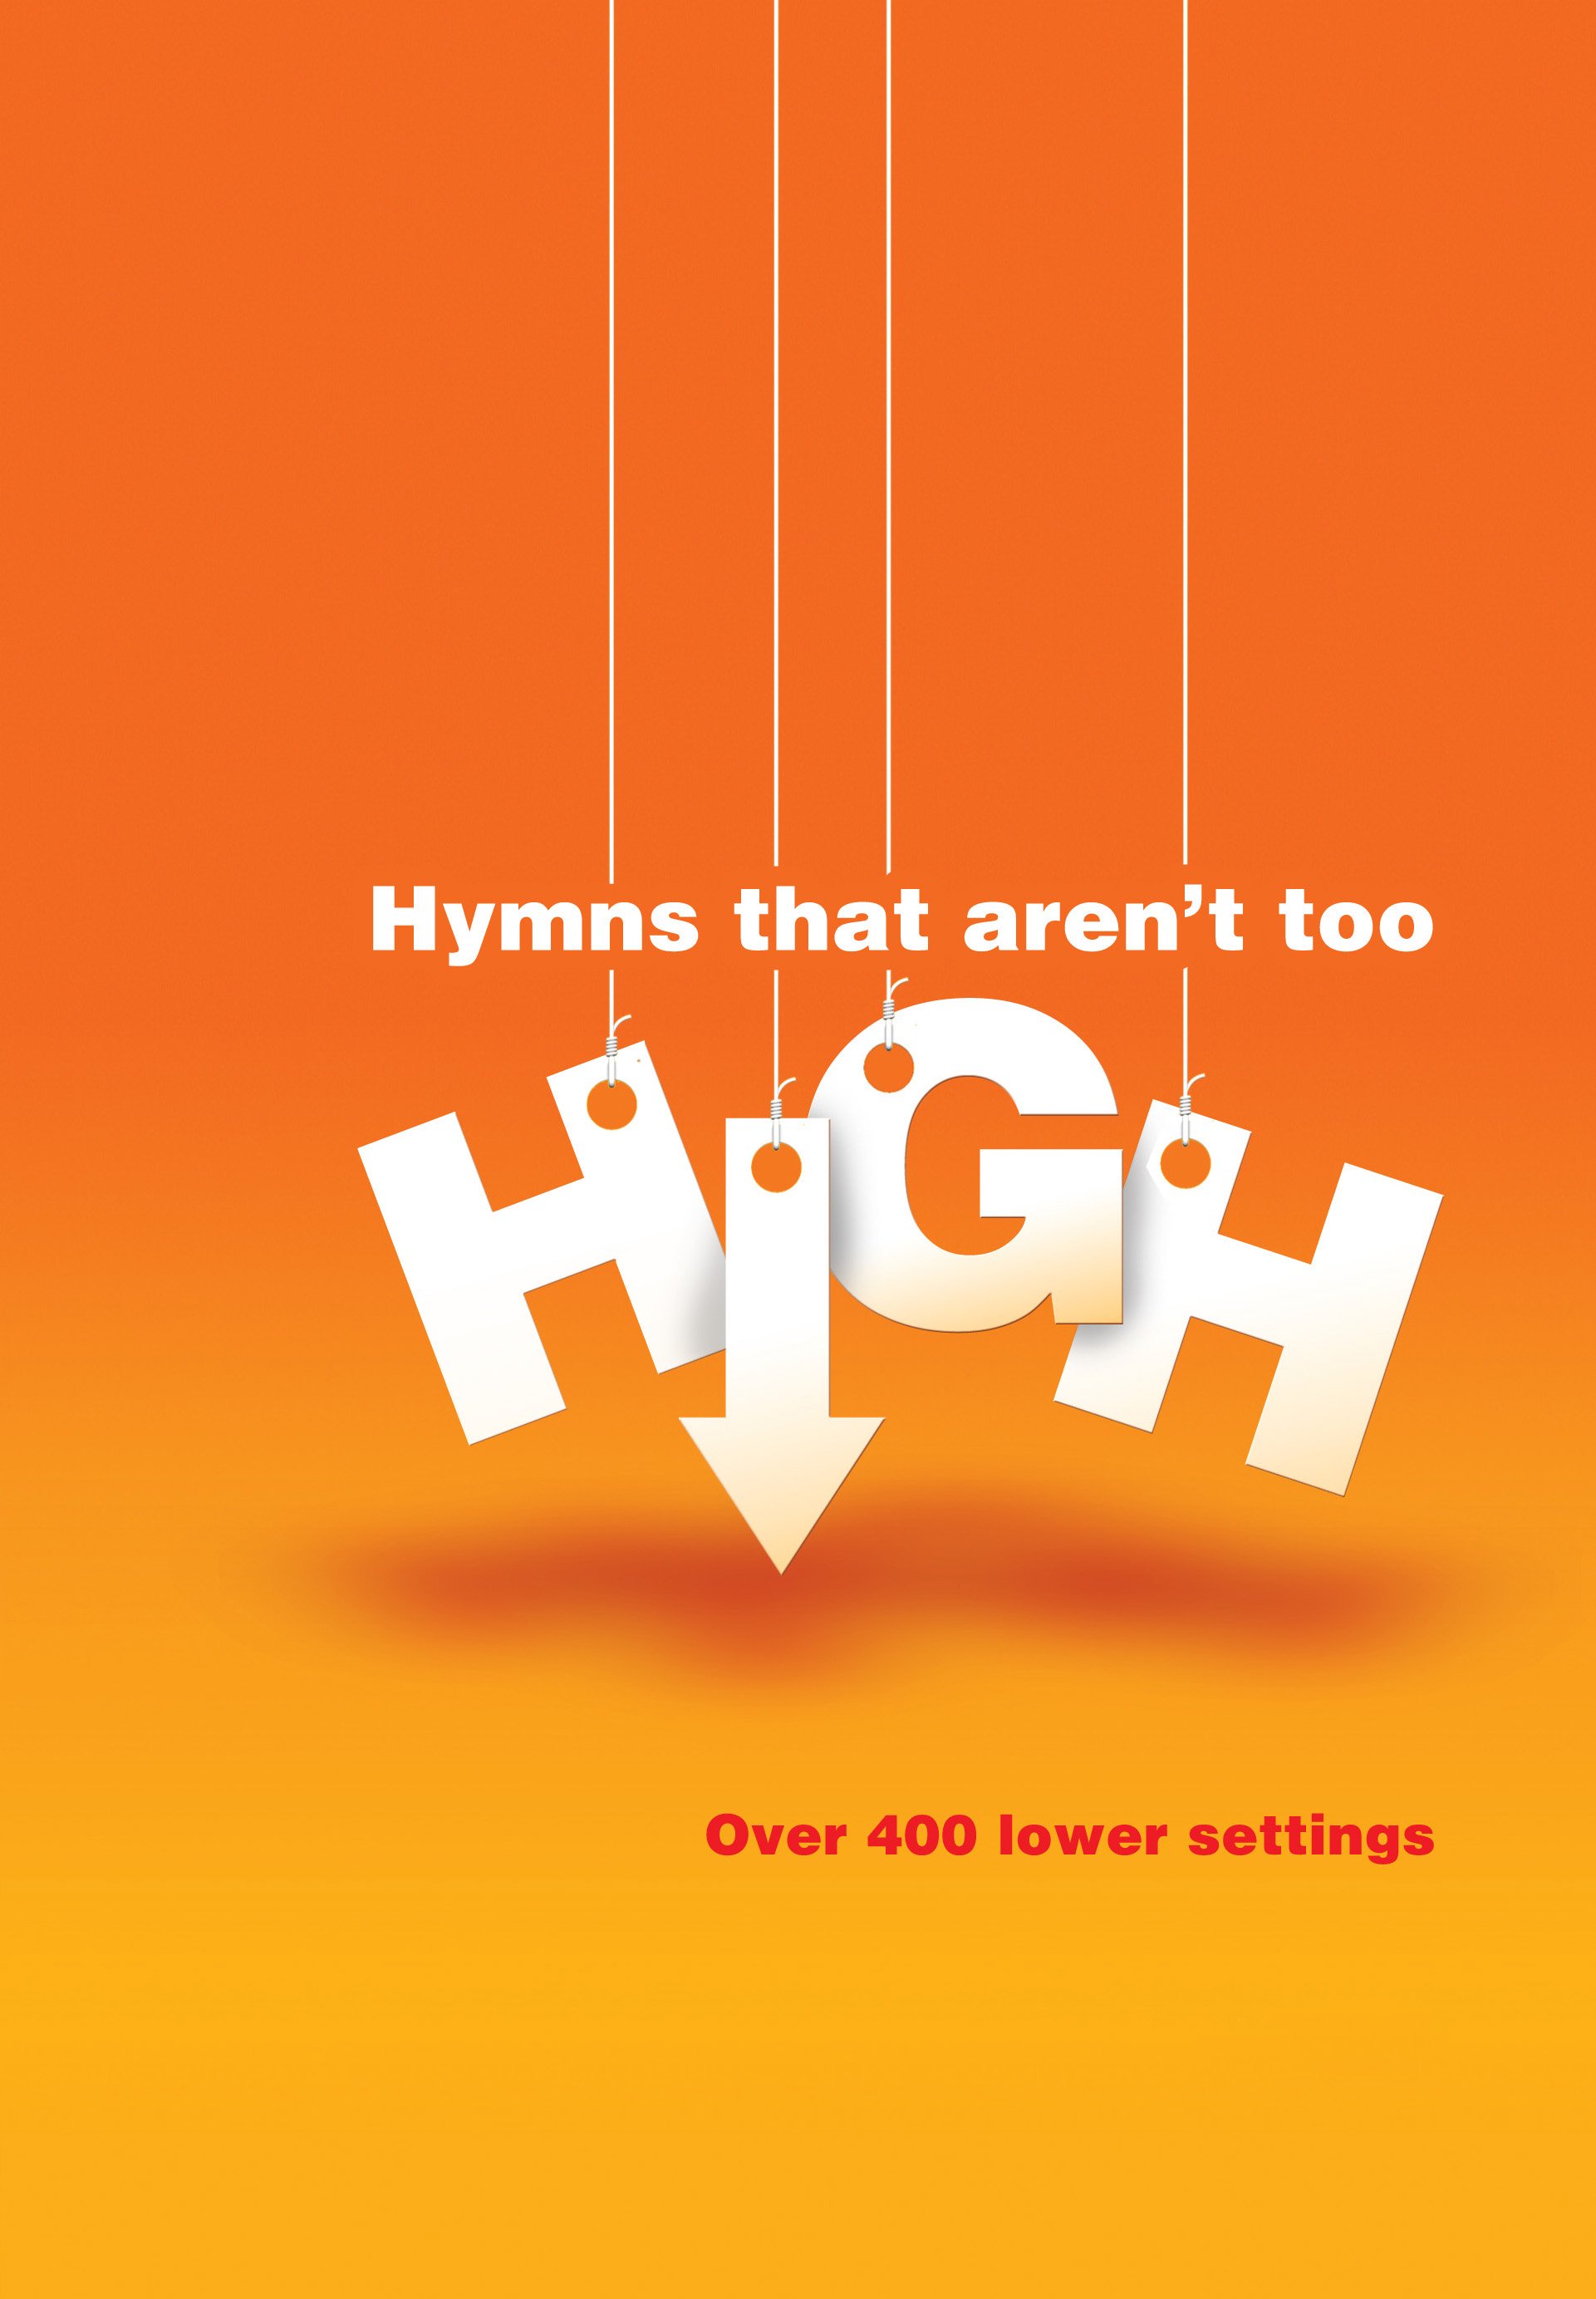 Hymns That Aren't Too High